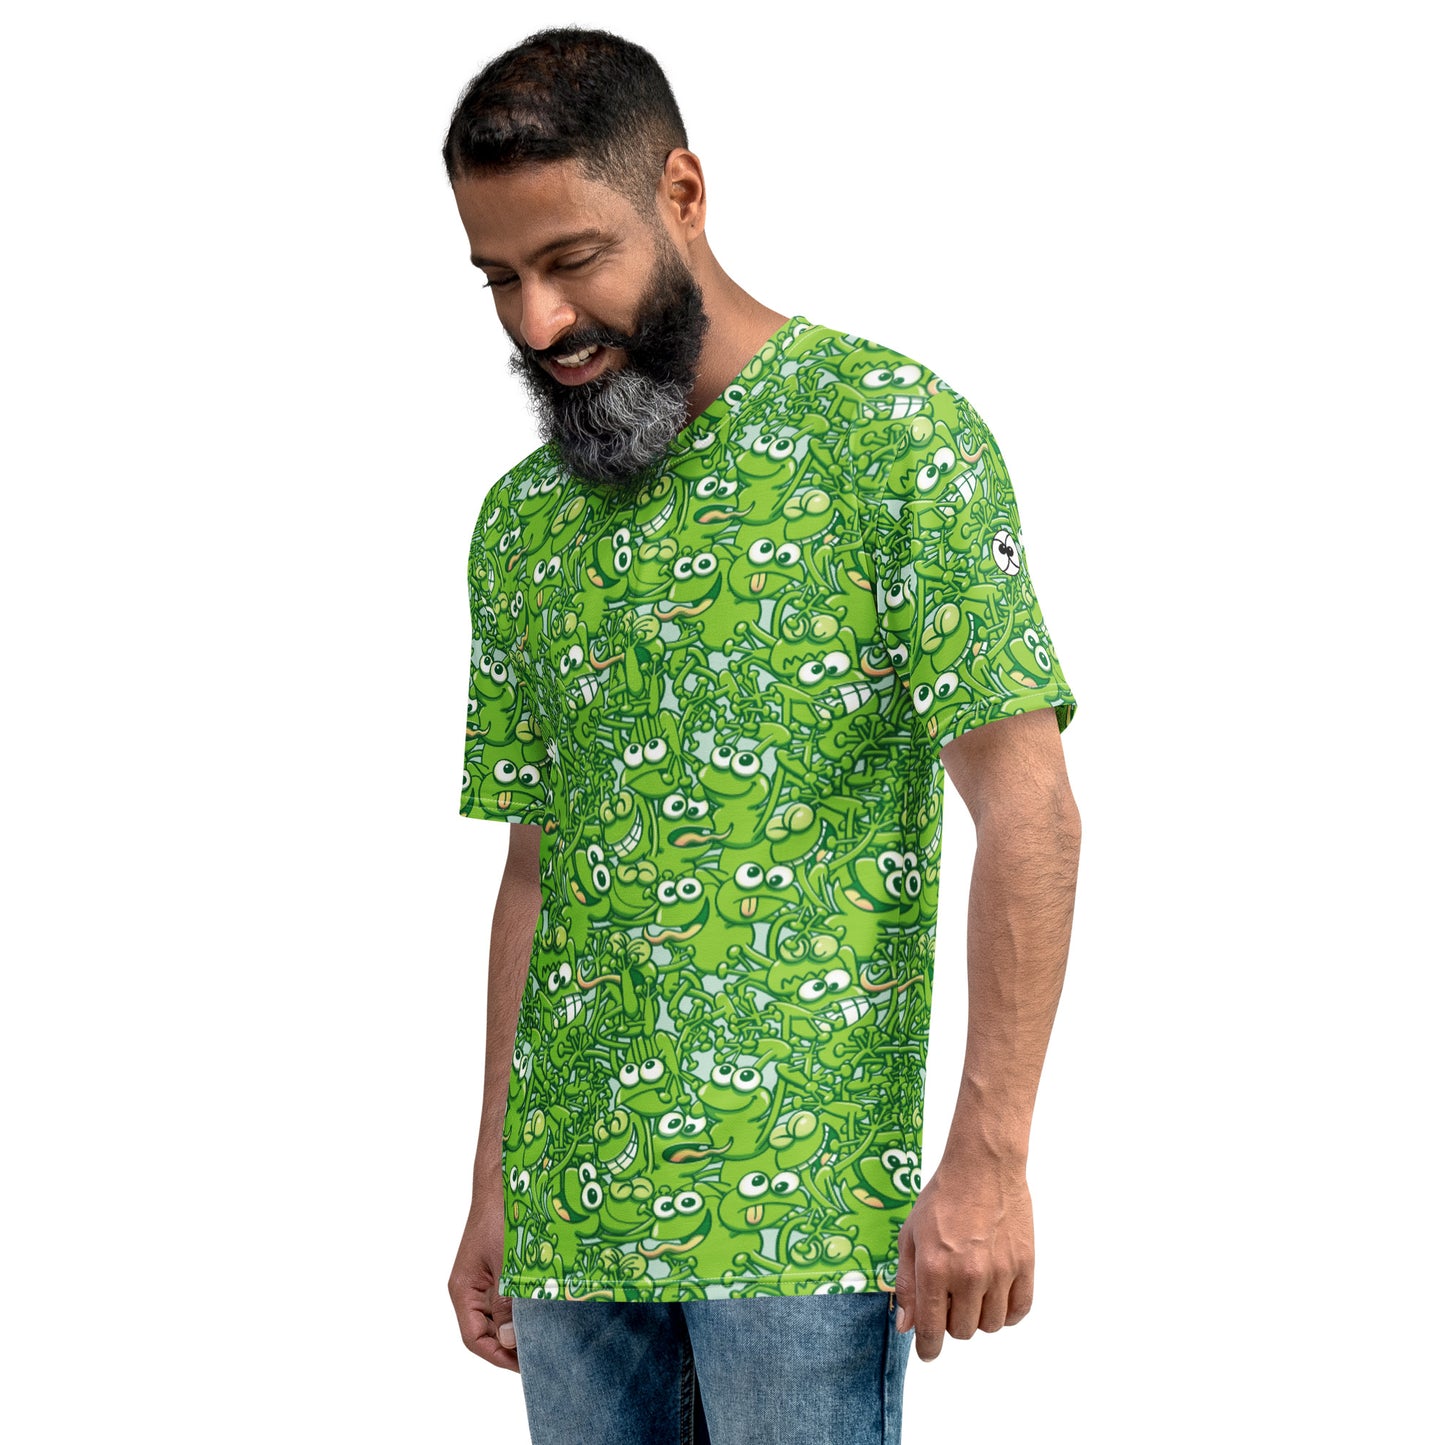 An army of happy green frogs appears when the rain stops Men's t-shirt ...